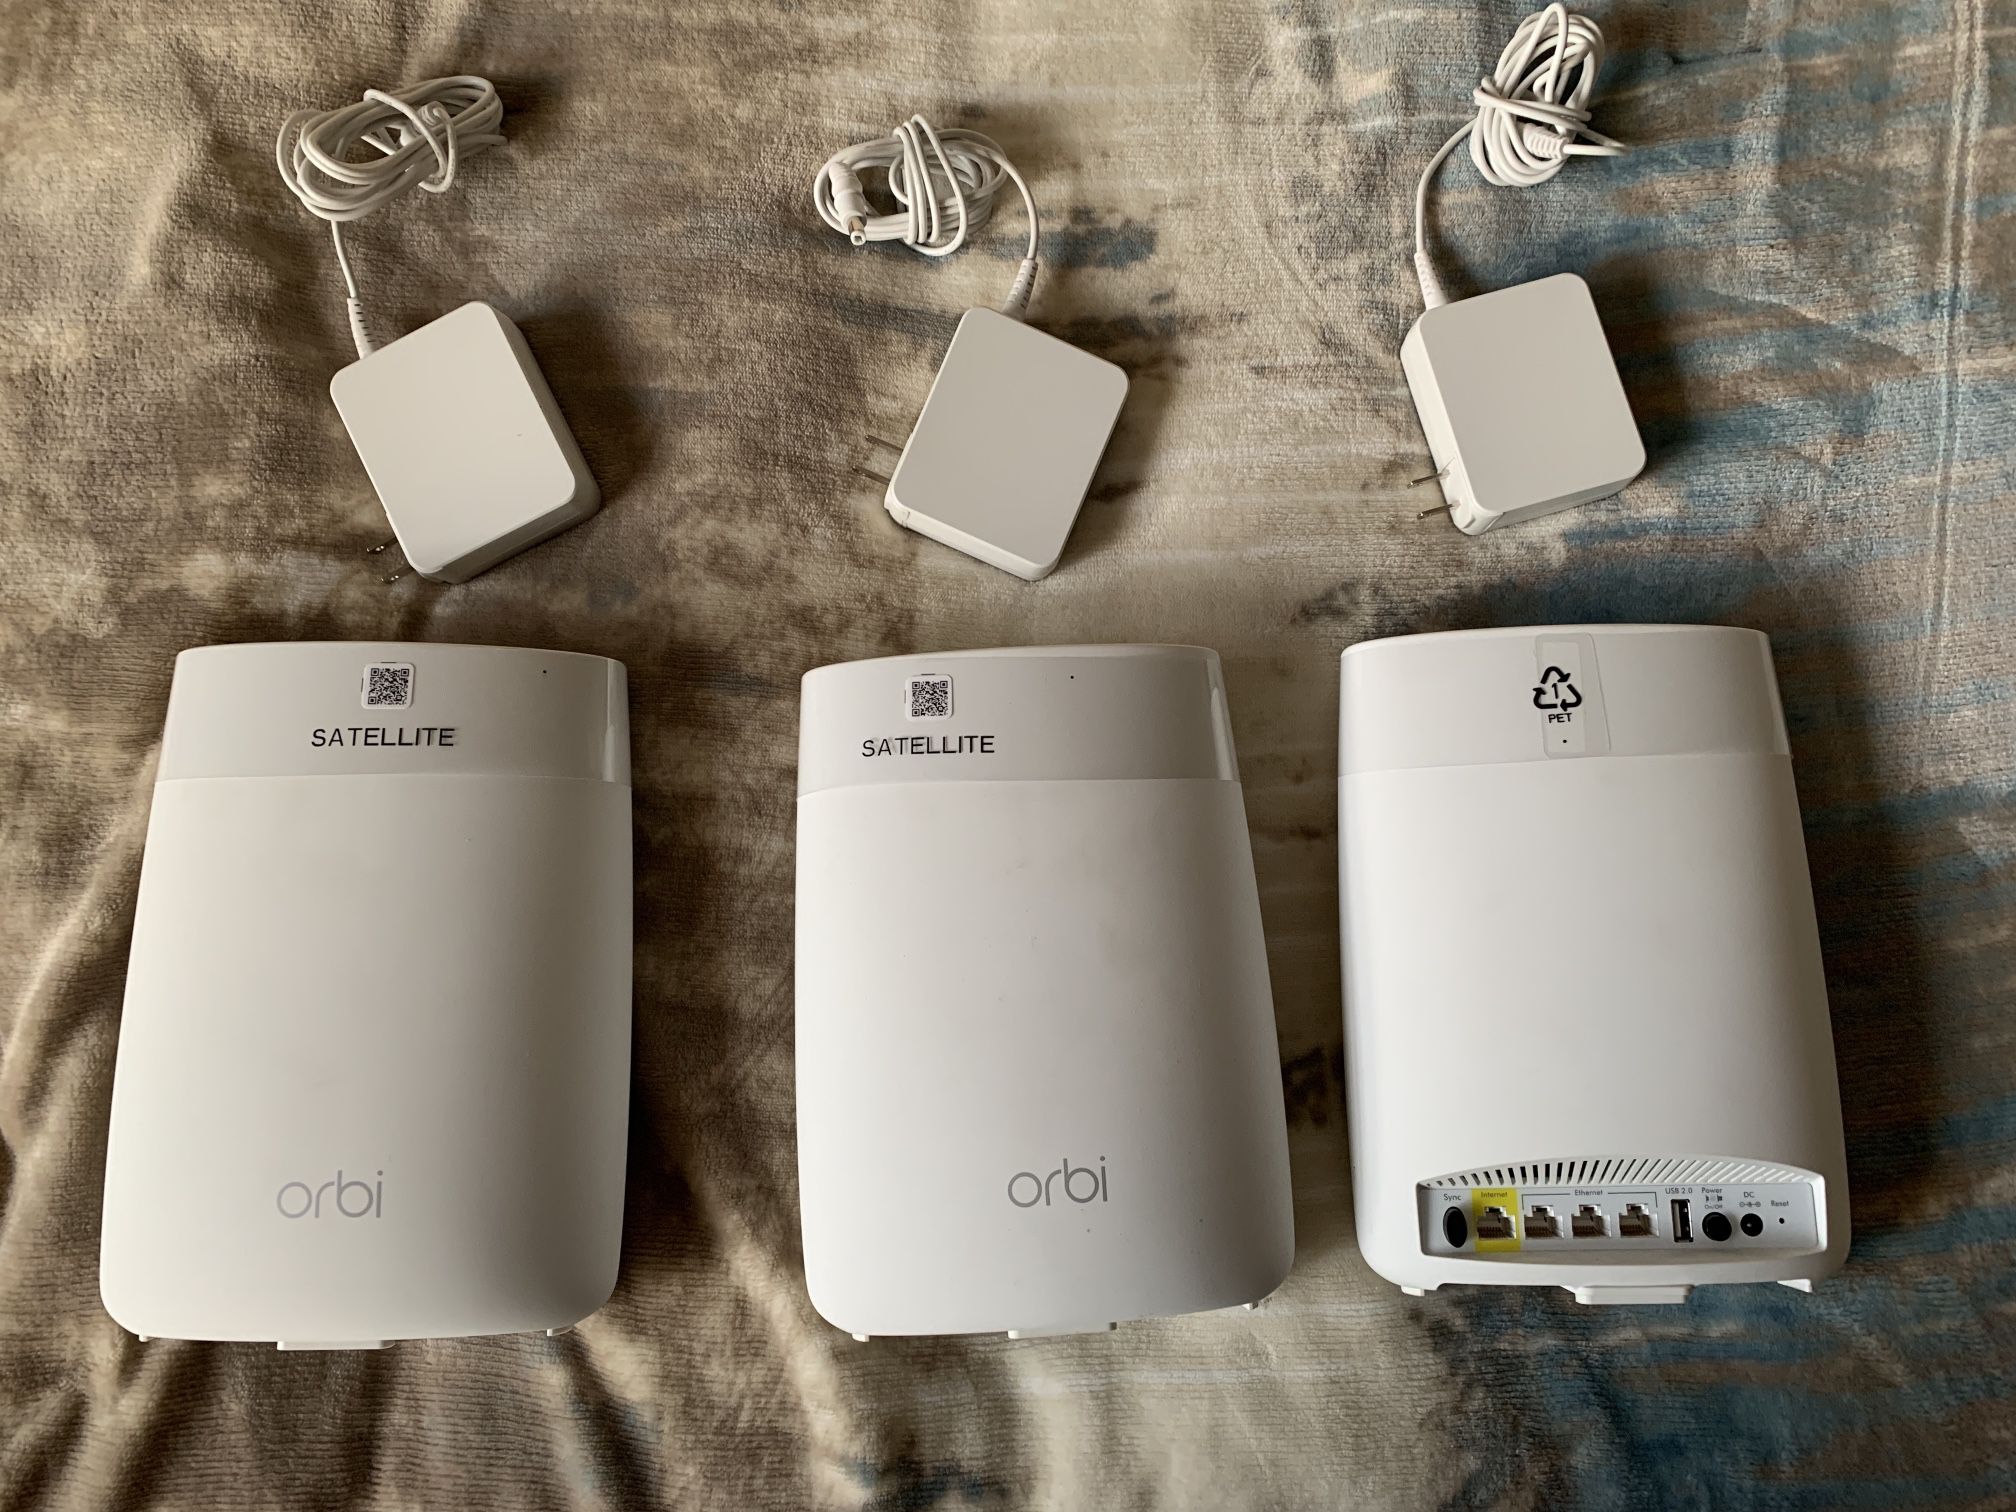 Orbi Tri-band Mesh Network RBR50 router and 2 RBS50 satellites